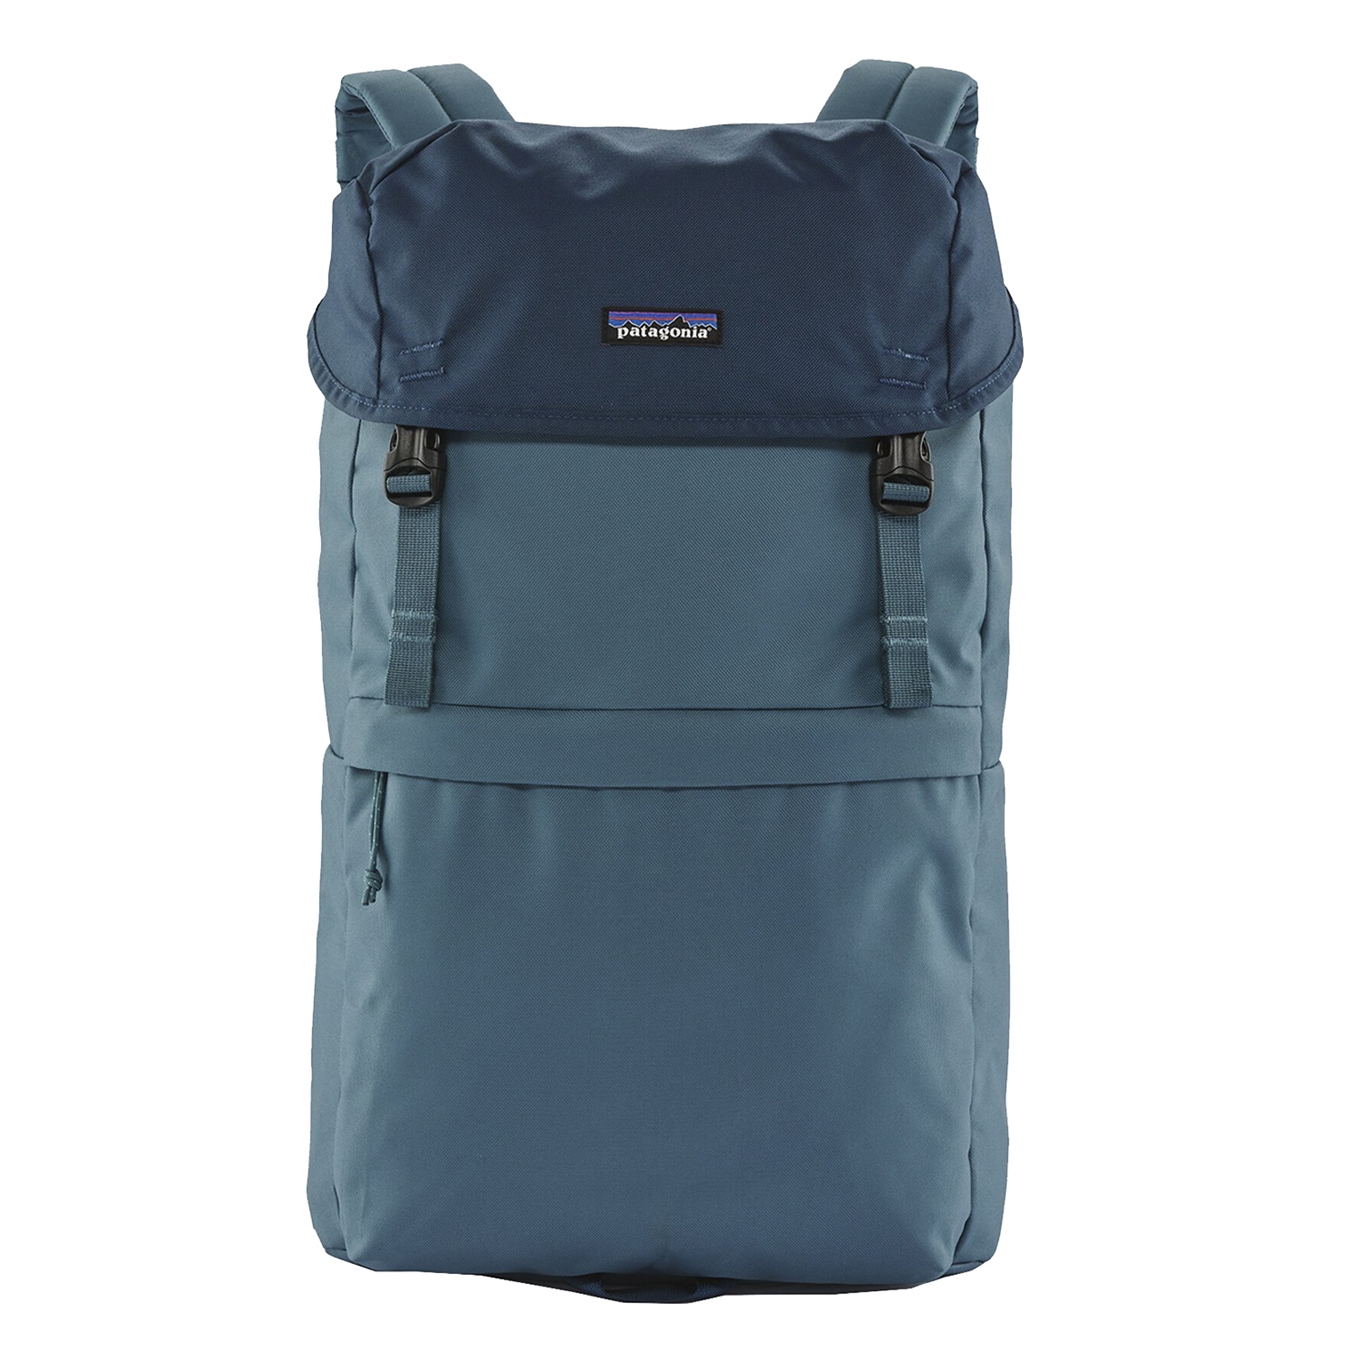 Patagonia Arbor Lid Pack abalone blue backpack